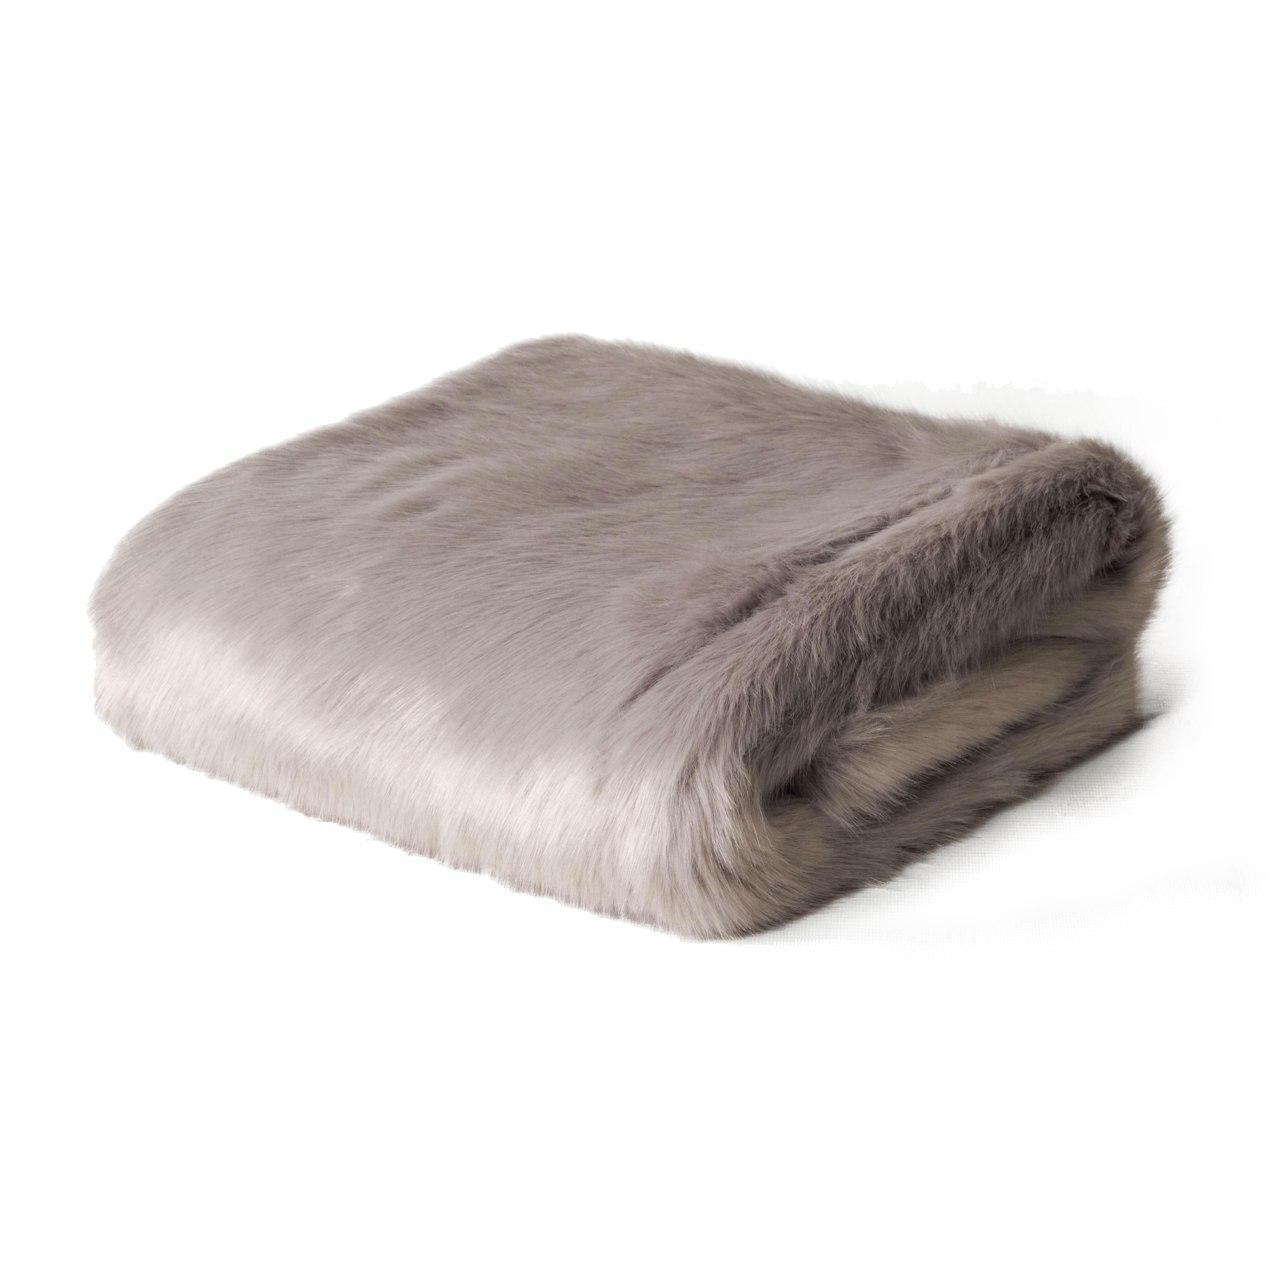 An image of Charley Chau Faux-Fur Blanket Lilac Rabbit, Large